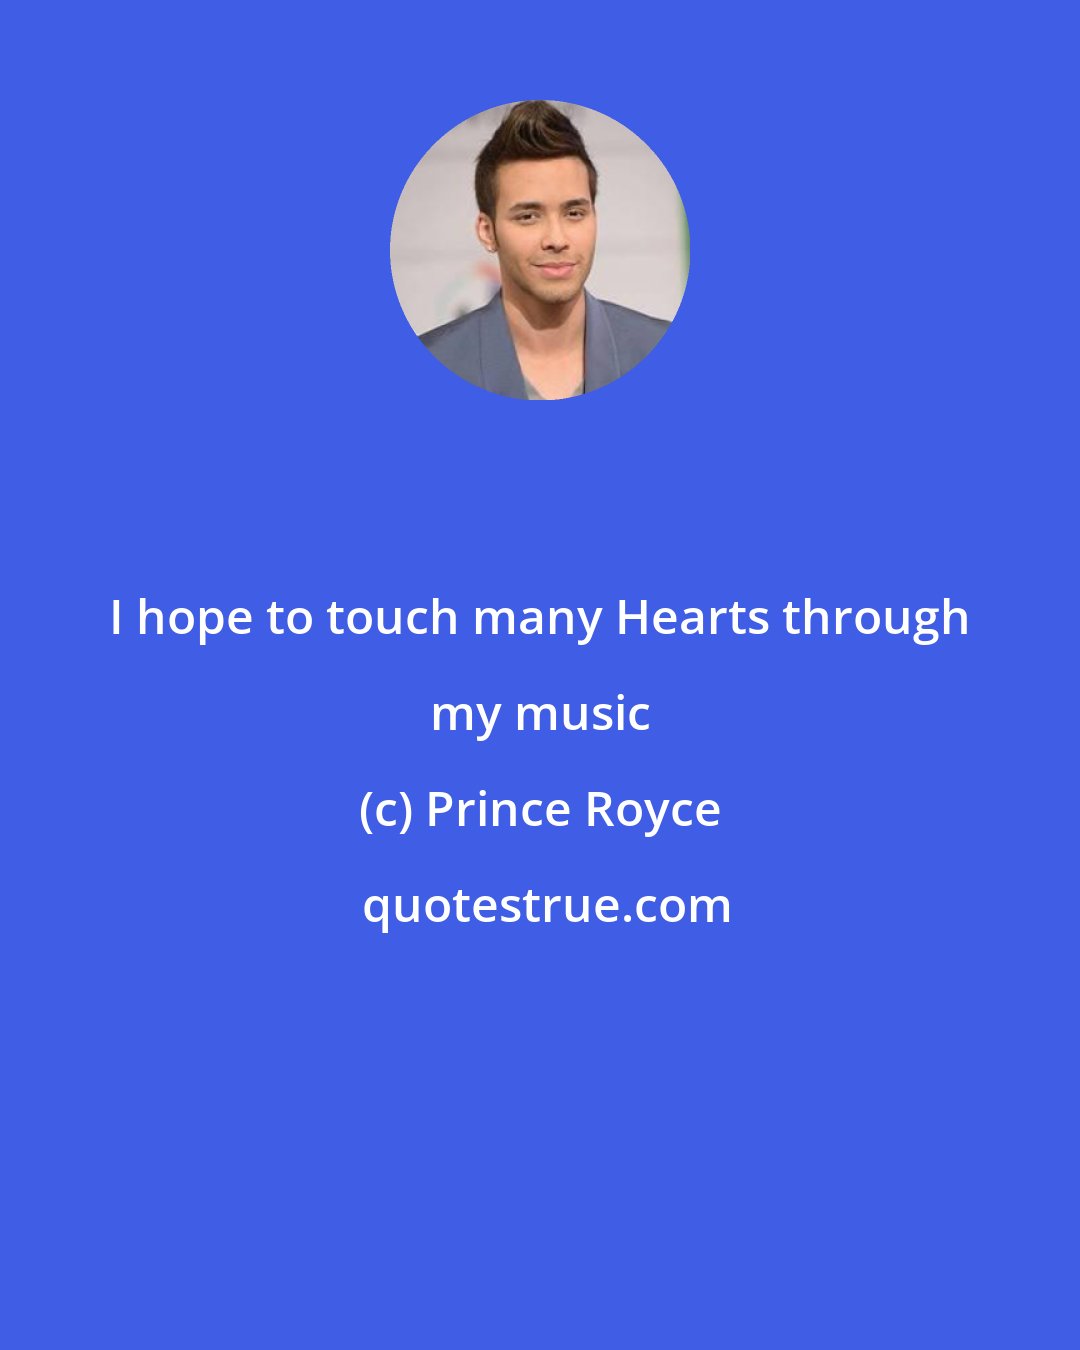 Prince Royce: I hope to touch many Hearts through my music